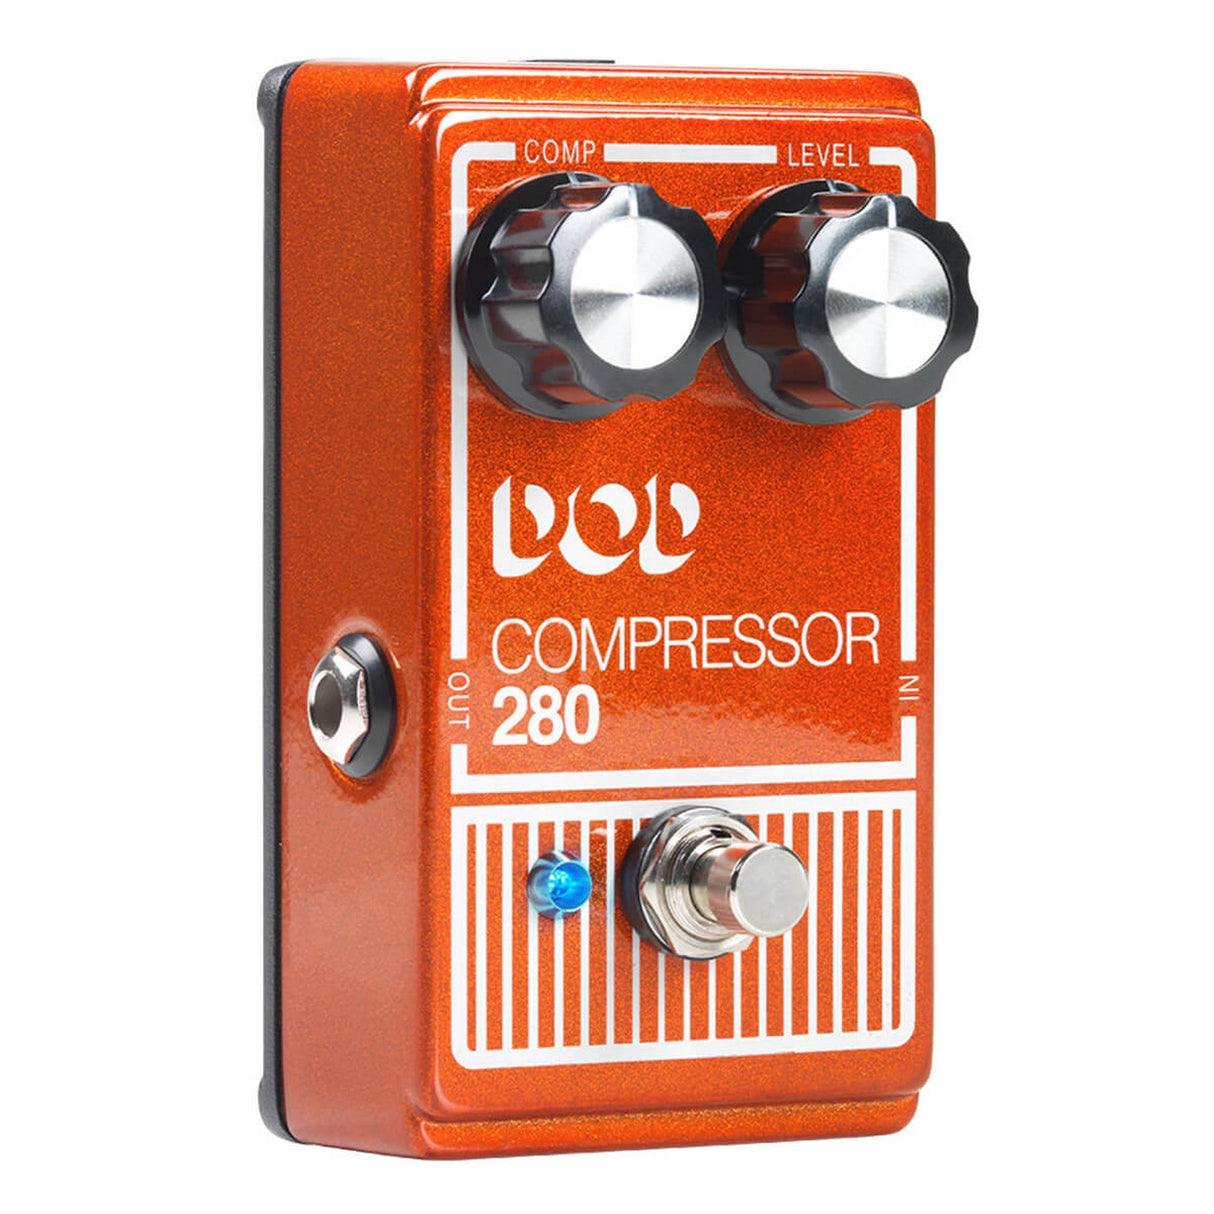 DigiTech DOD Compressor 280 Guitar Effects Pedal with Comp and Level Controls